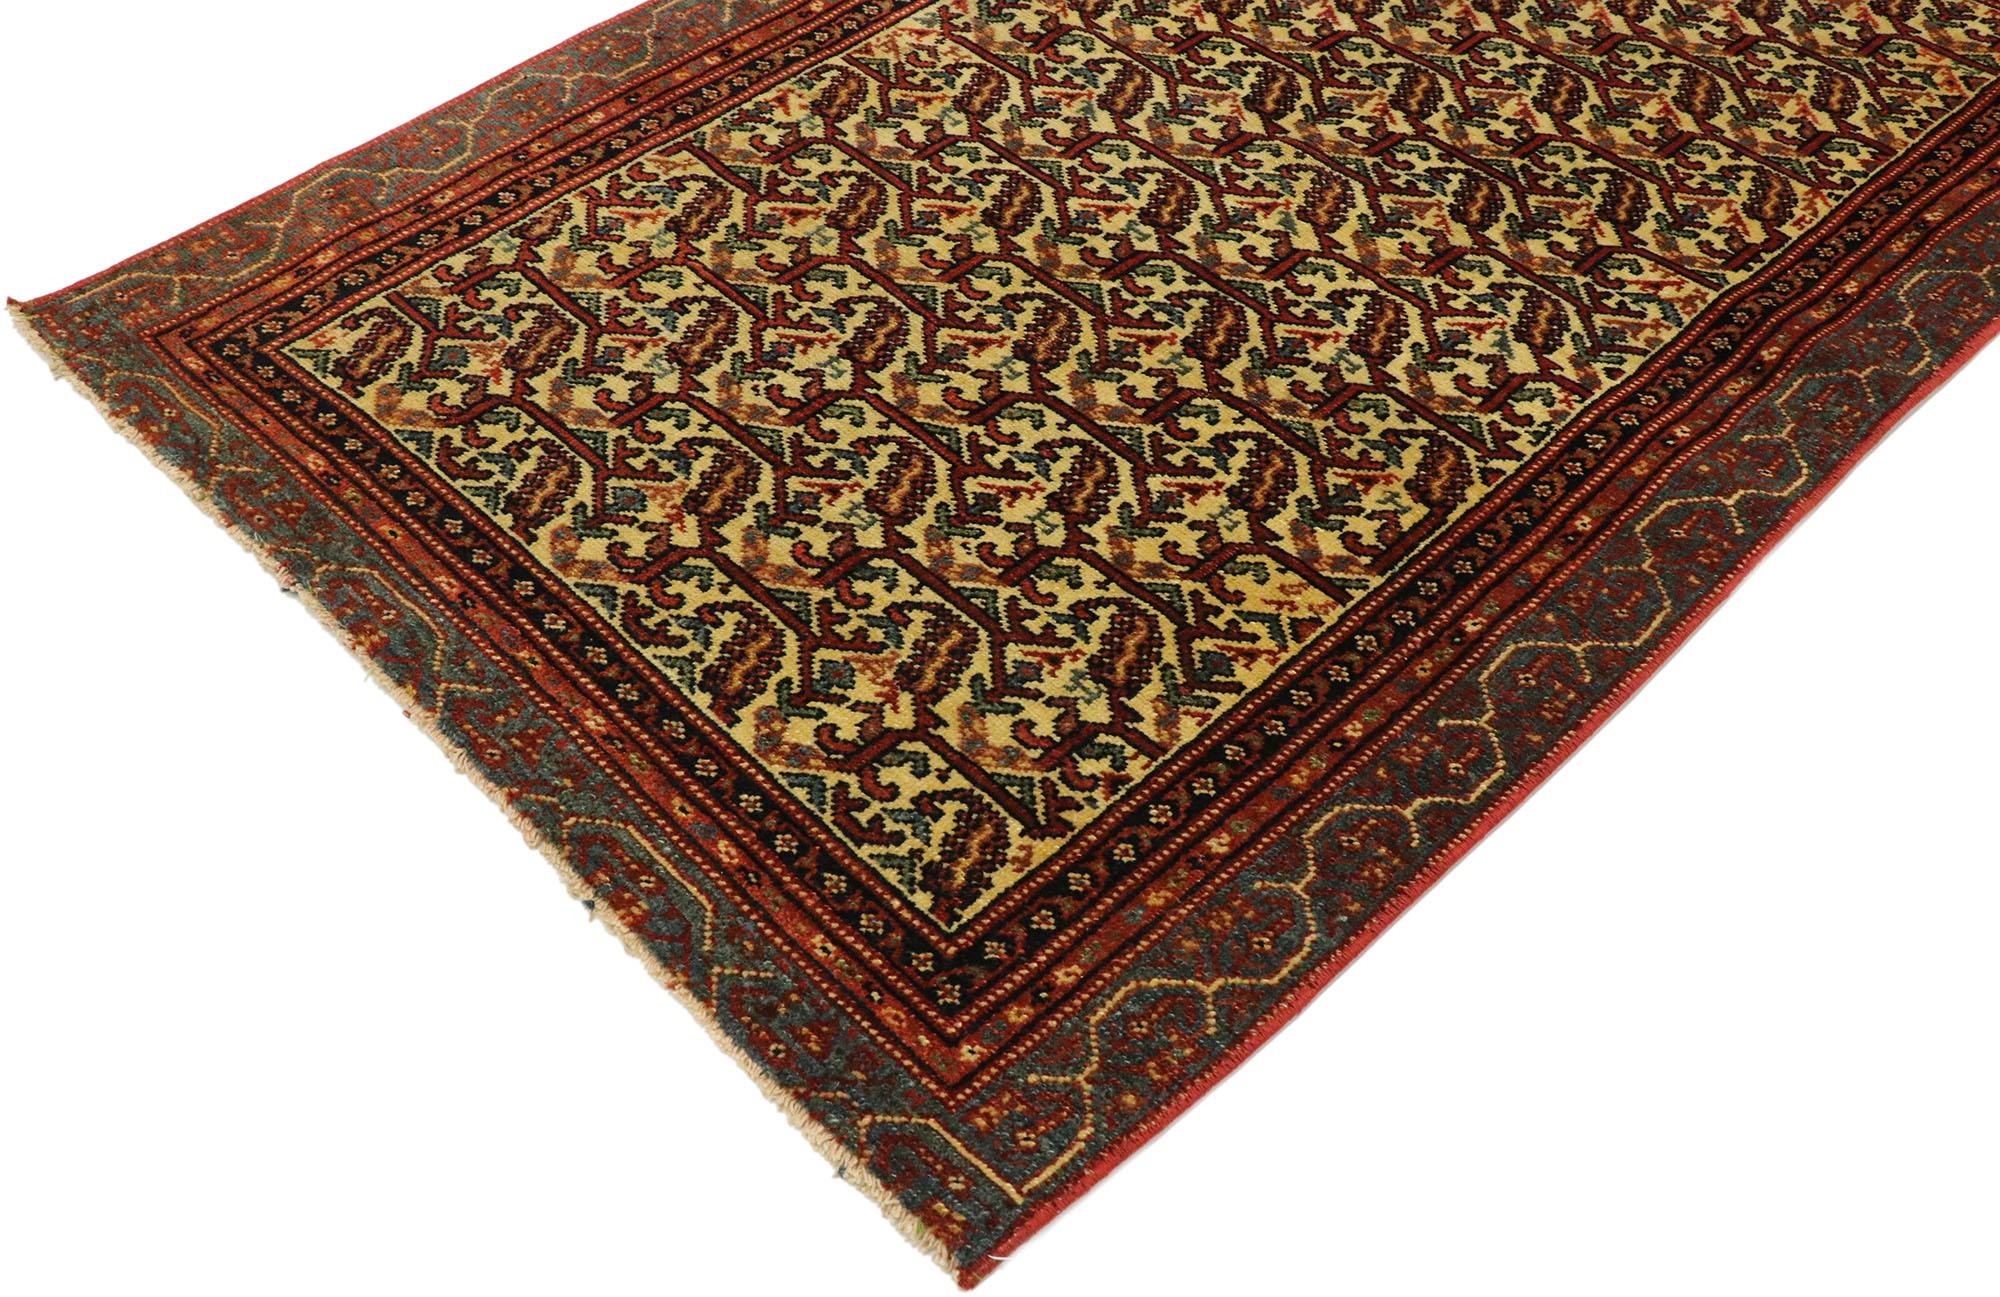 53145, vintage Persian Malayer rug with Boteh Lattice design and Arts & Crafts style. With rustic charm and timeless appeal in an earthy-inspired colorway, this hand knotted wool vintage Persian Malayer rug can beautifully blend modern,